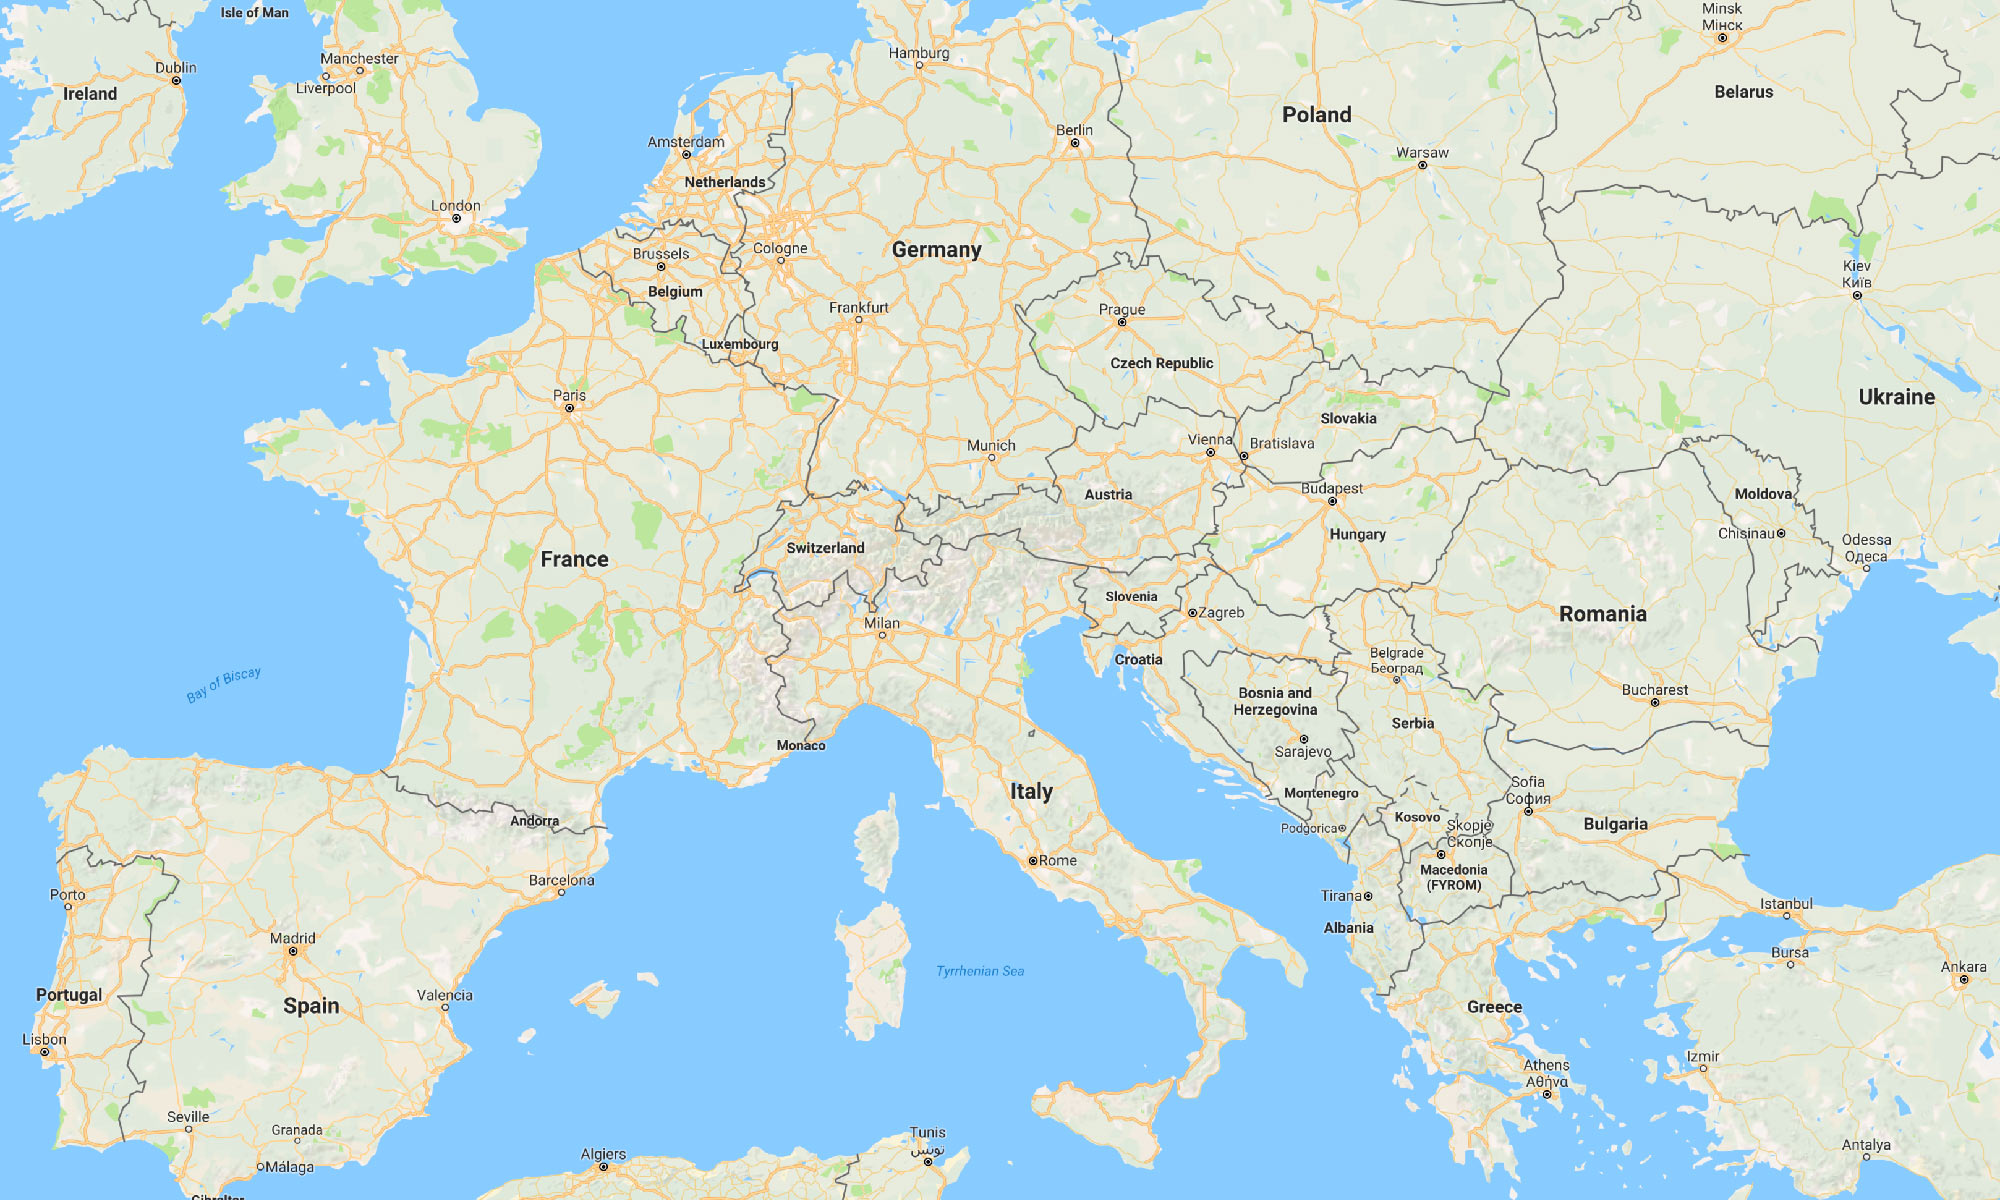 A Google Map of Europe